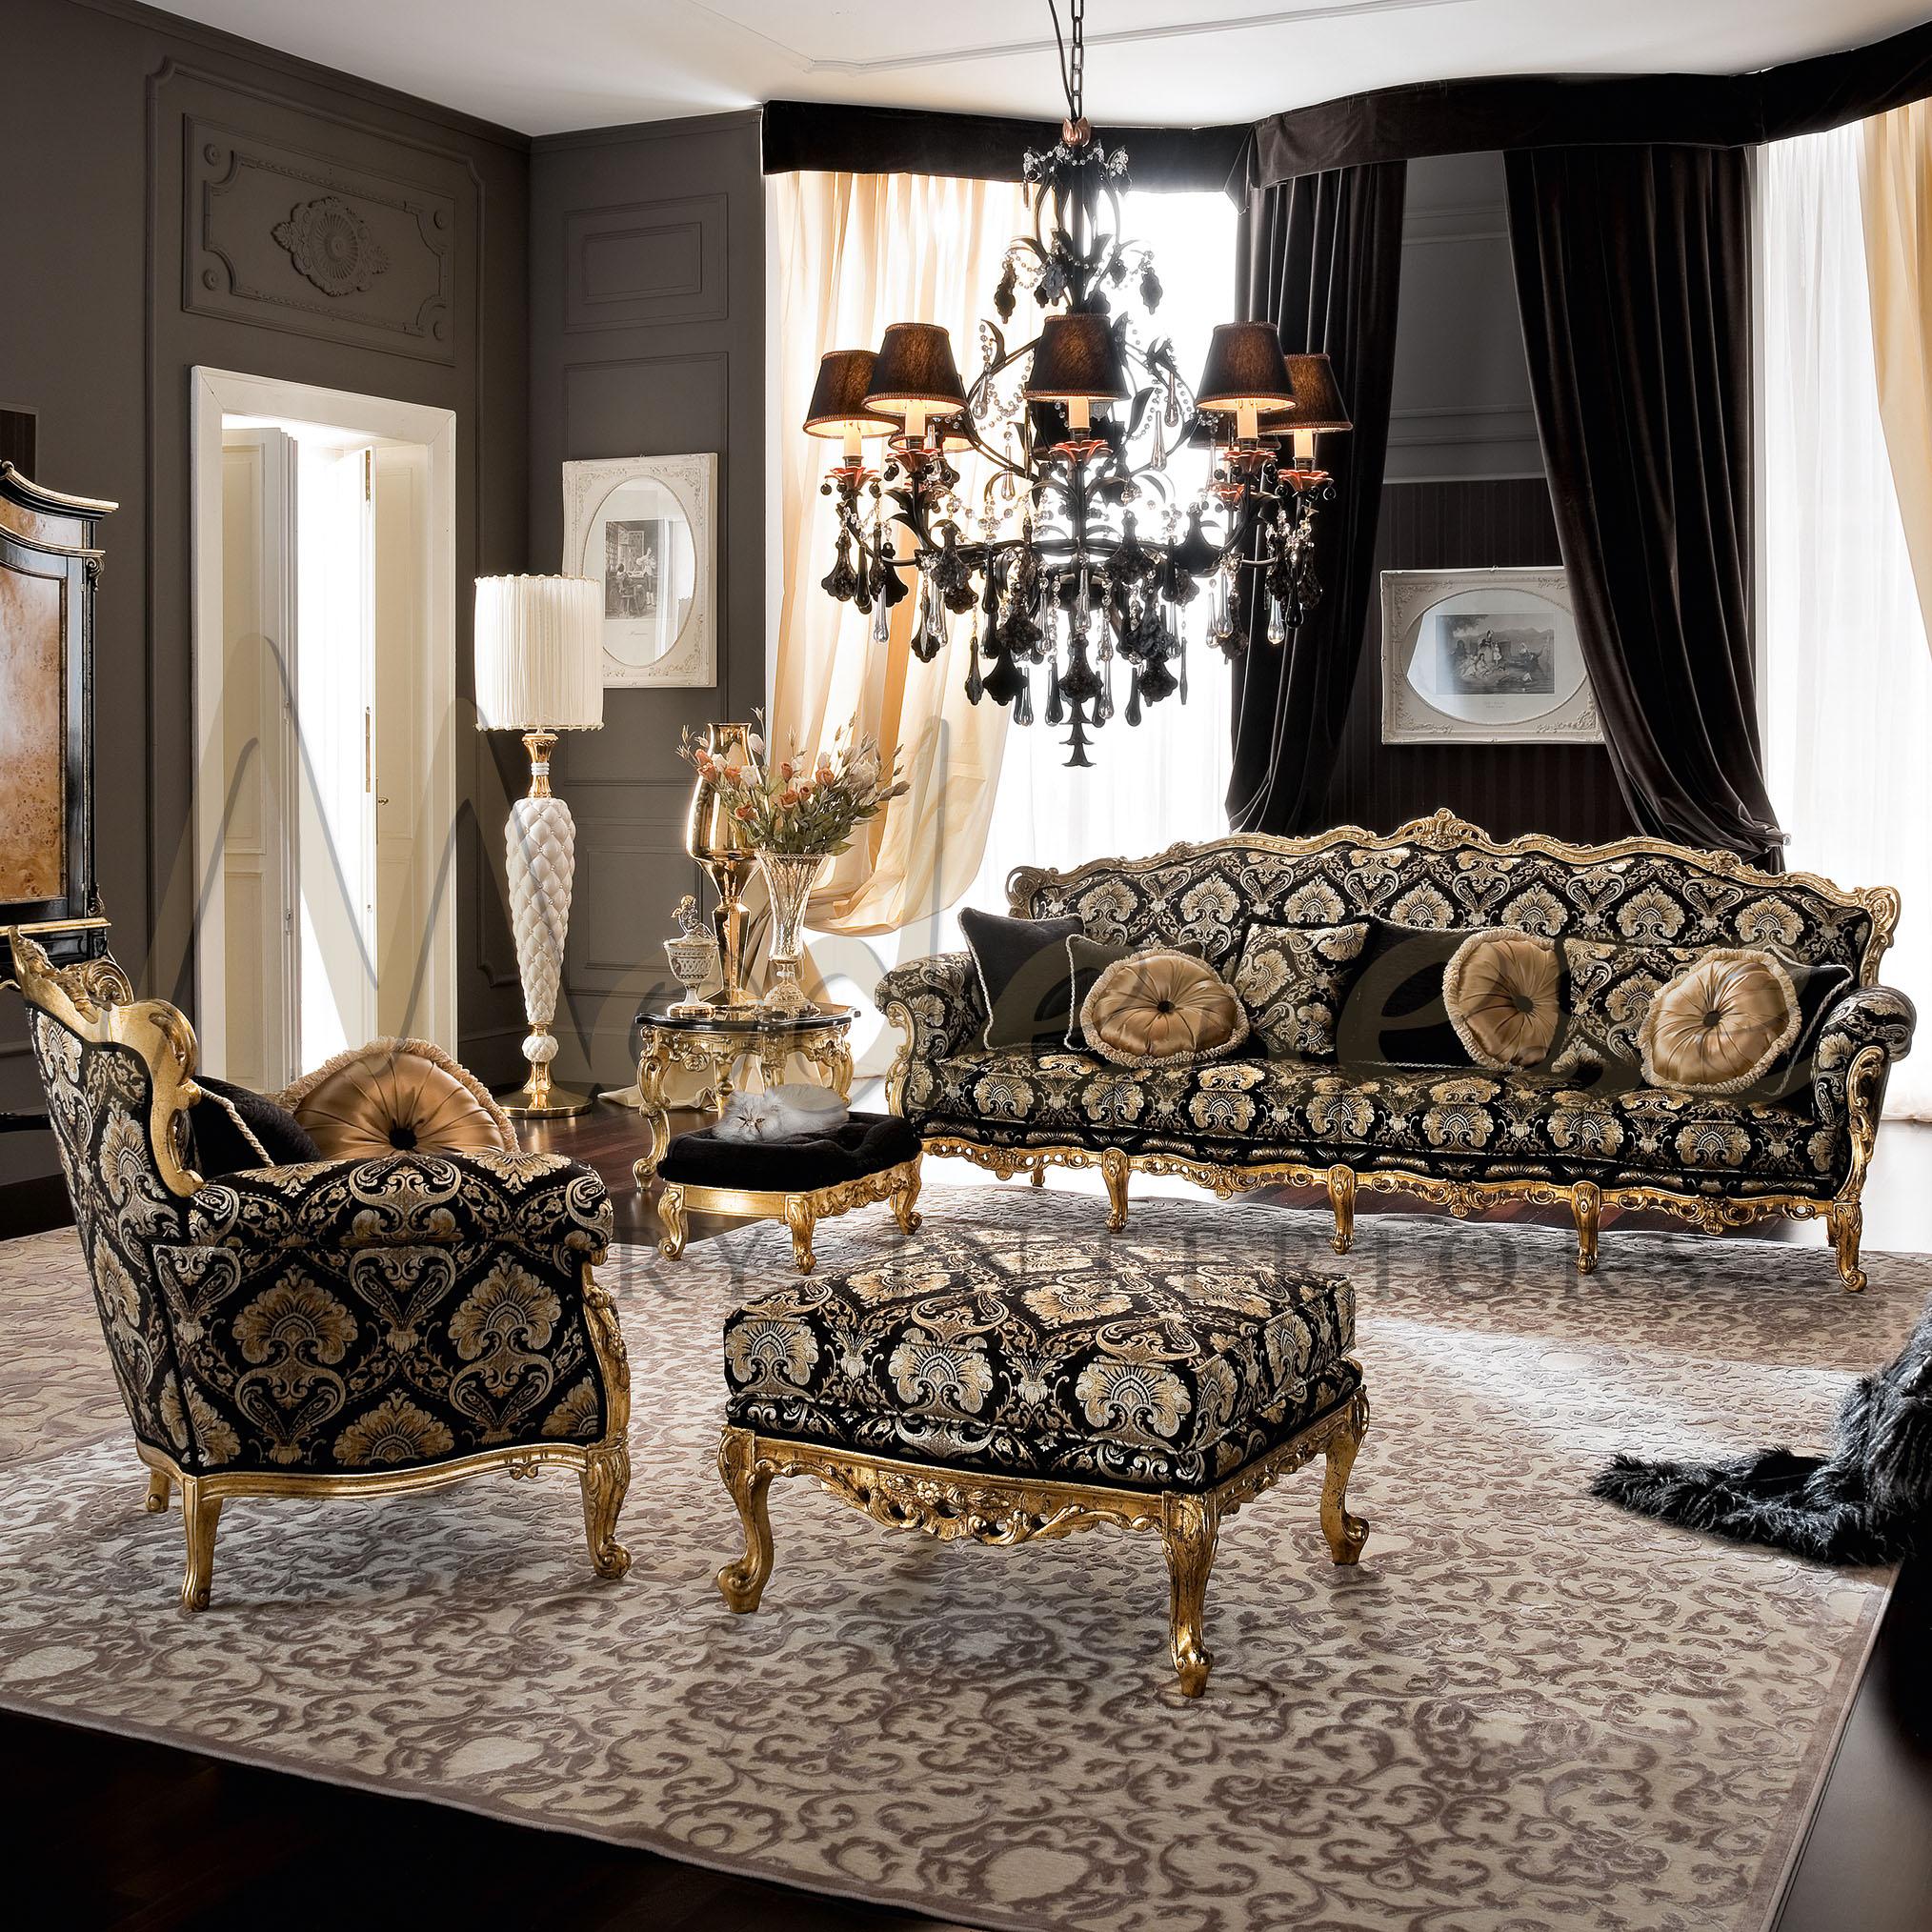 Specially designed armchair take on a neo-baroque style. This accent furniture is a great head turner piece in any living space. An eye catching black-gold upholstered fabric part of the unique collection of Modenese. Against the charismatic washed